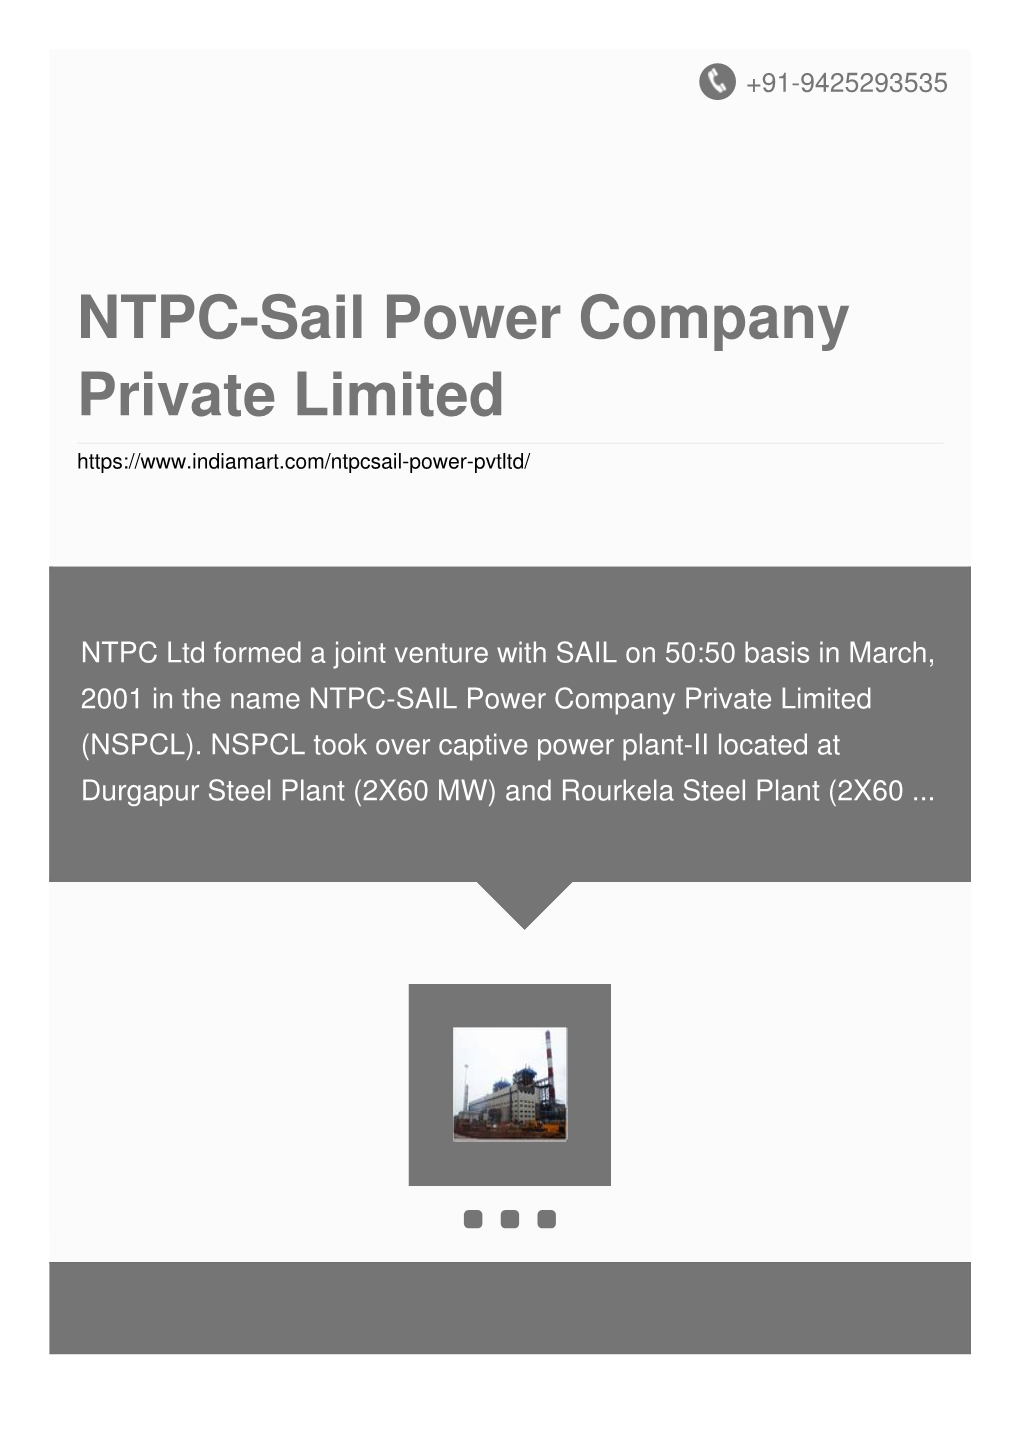 NTPC-Sail Power Company Private Limited